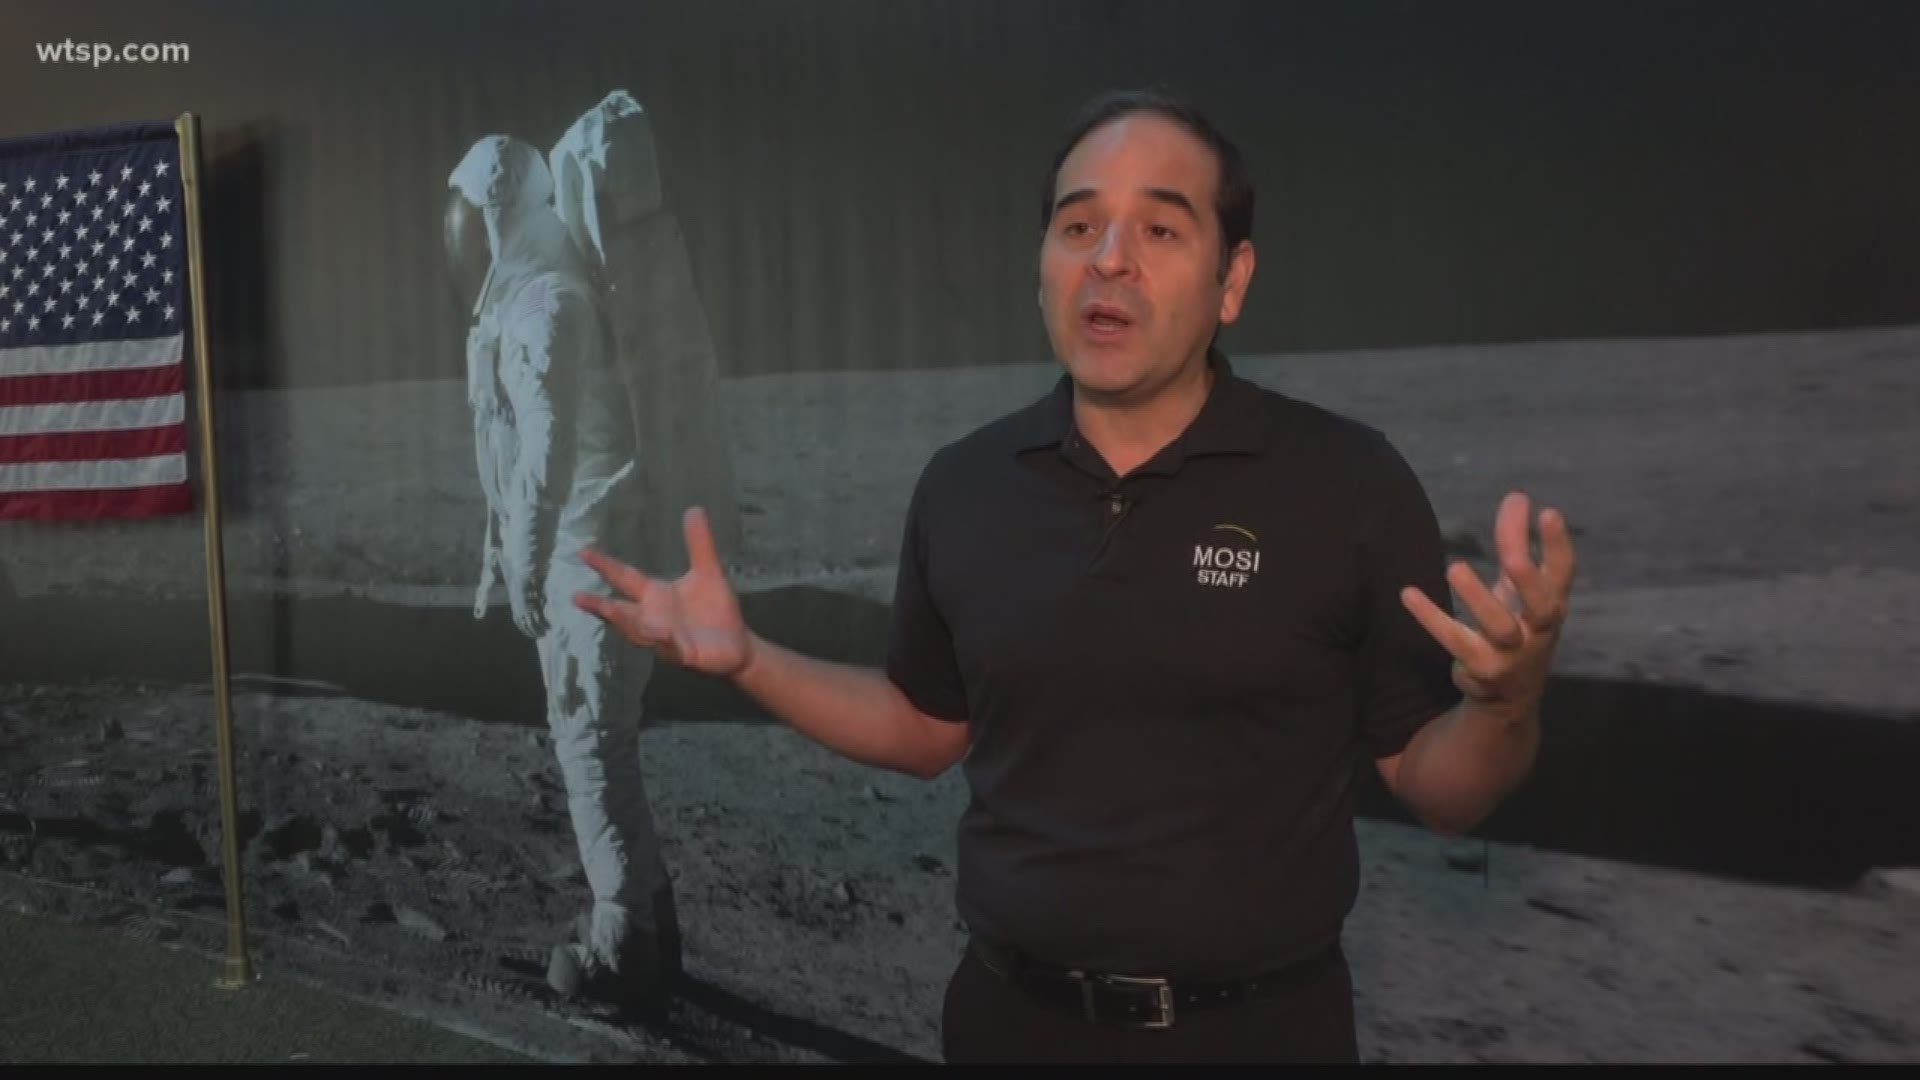 50 years after the famous spaceflight that first landed humans on the Moon, MOSI's exhibit shows off some of its historic artifacts. https://on.wtsp.com/2JvcwWc